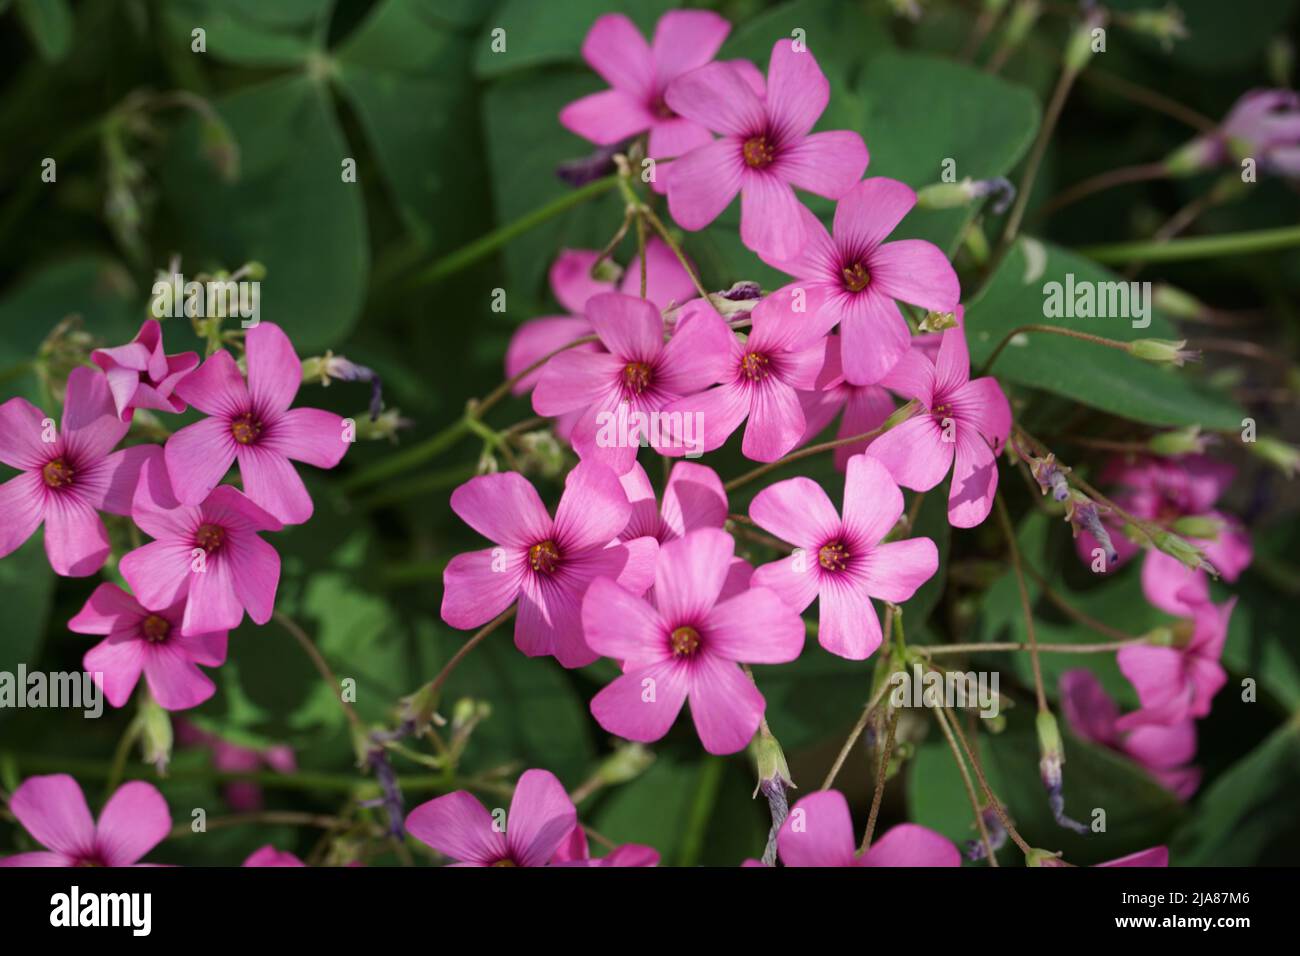 Oxalis articulata bushy flowering and decorative plant with many tiny intensive pink flowers Stock Photo